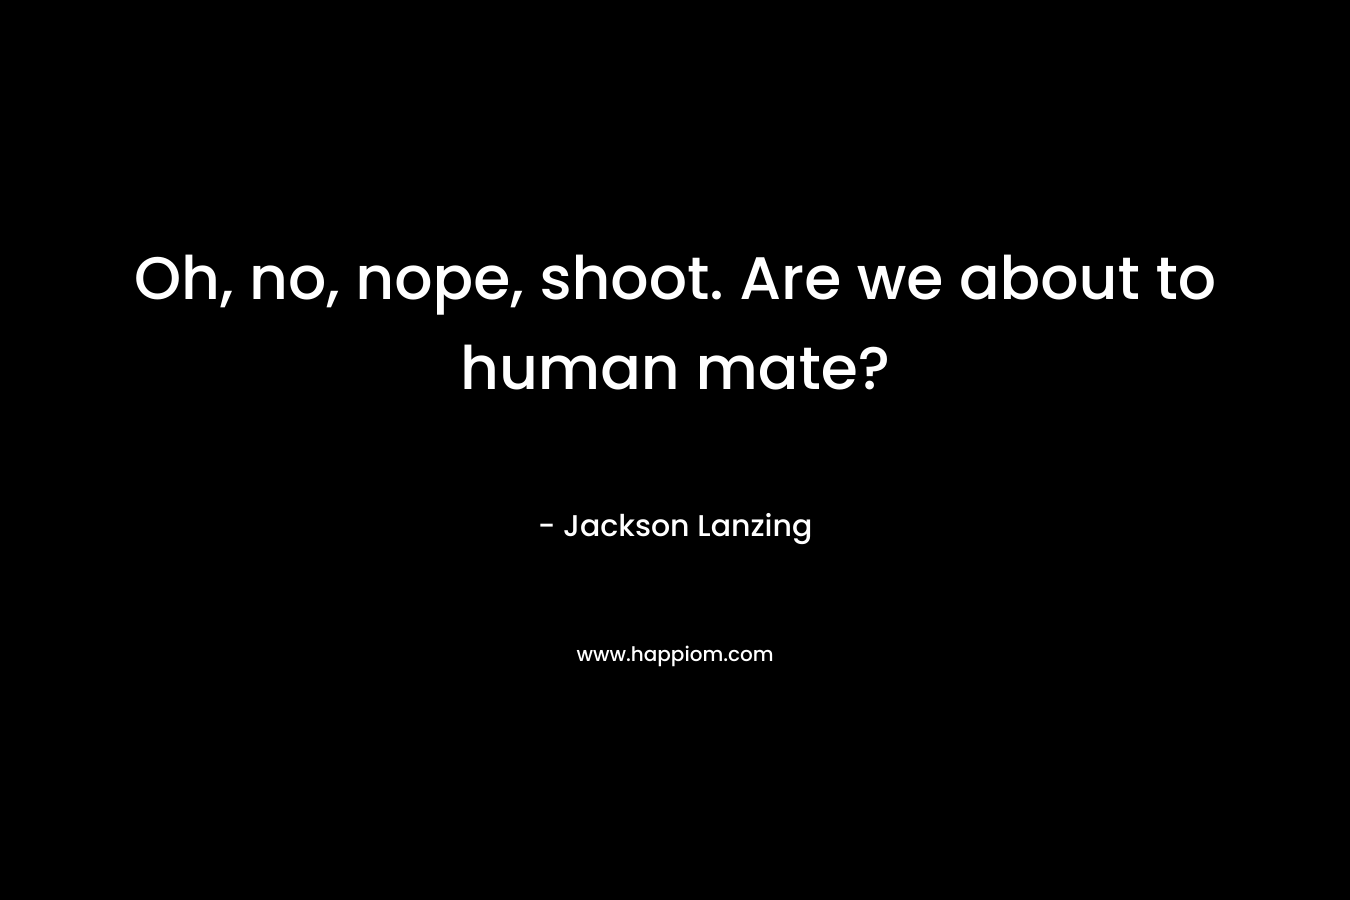 Oh, no, nope, shoot. Are we about to human mate? – Jackson Lanzing